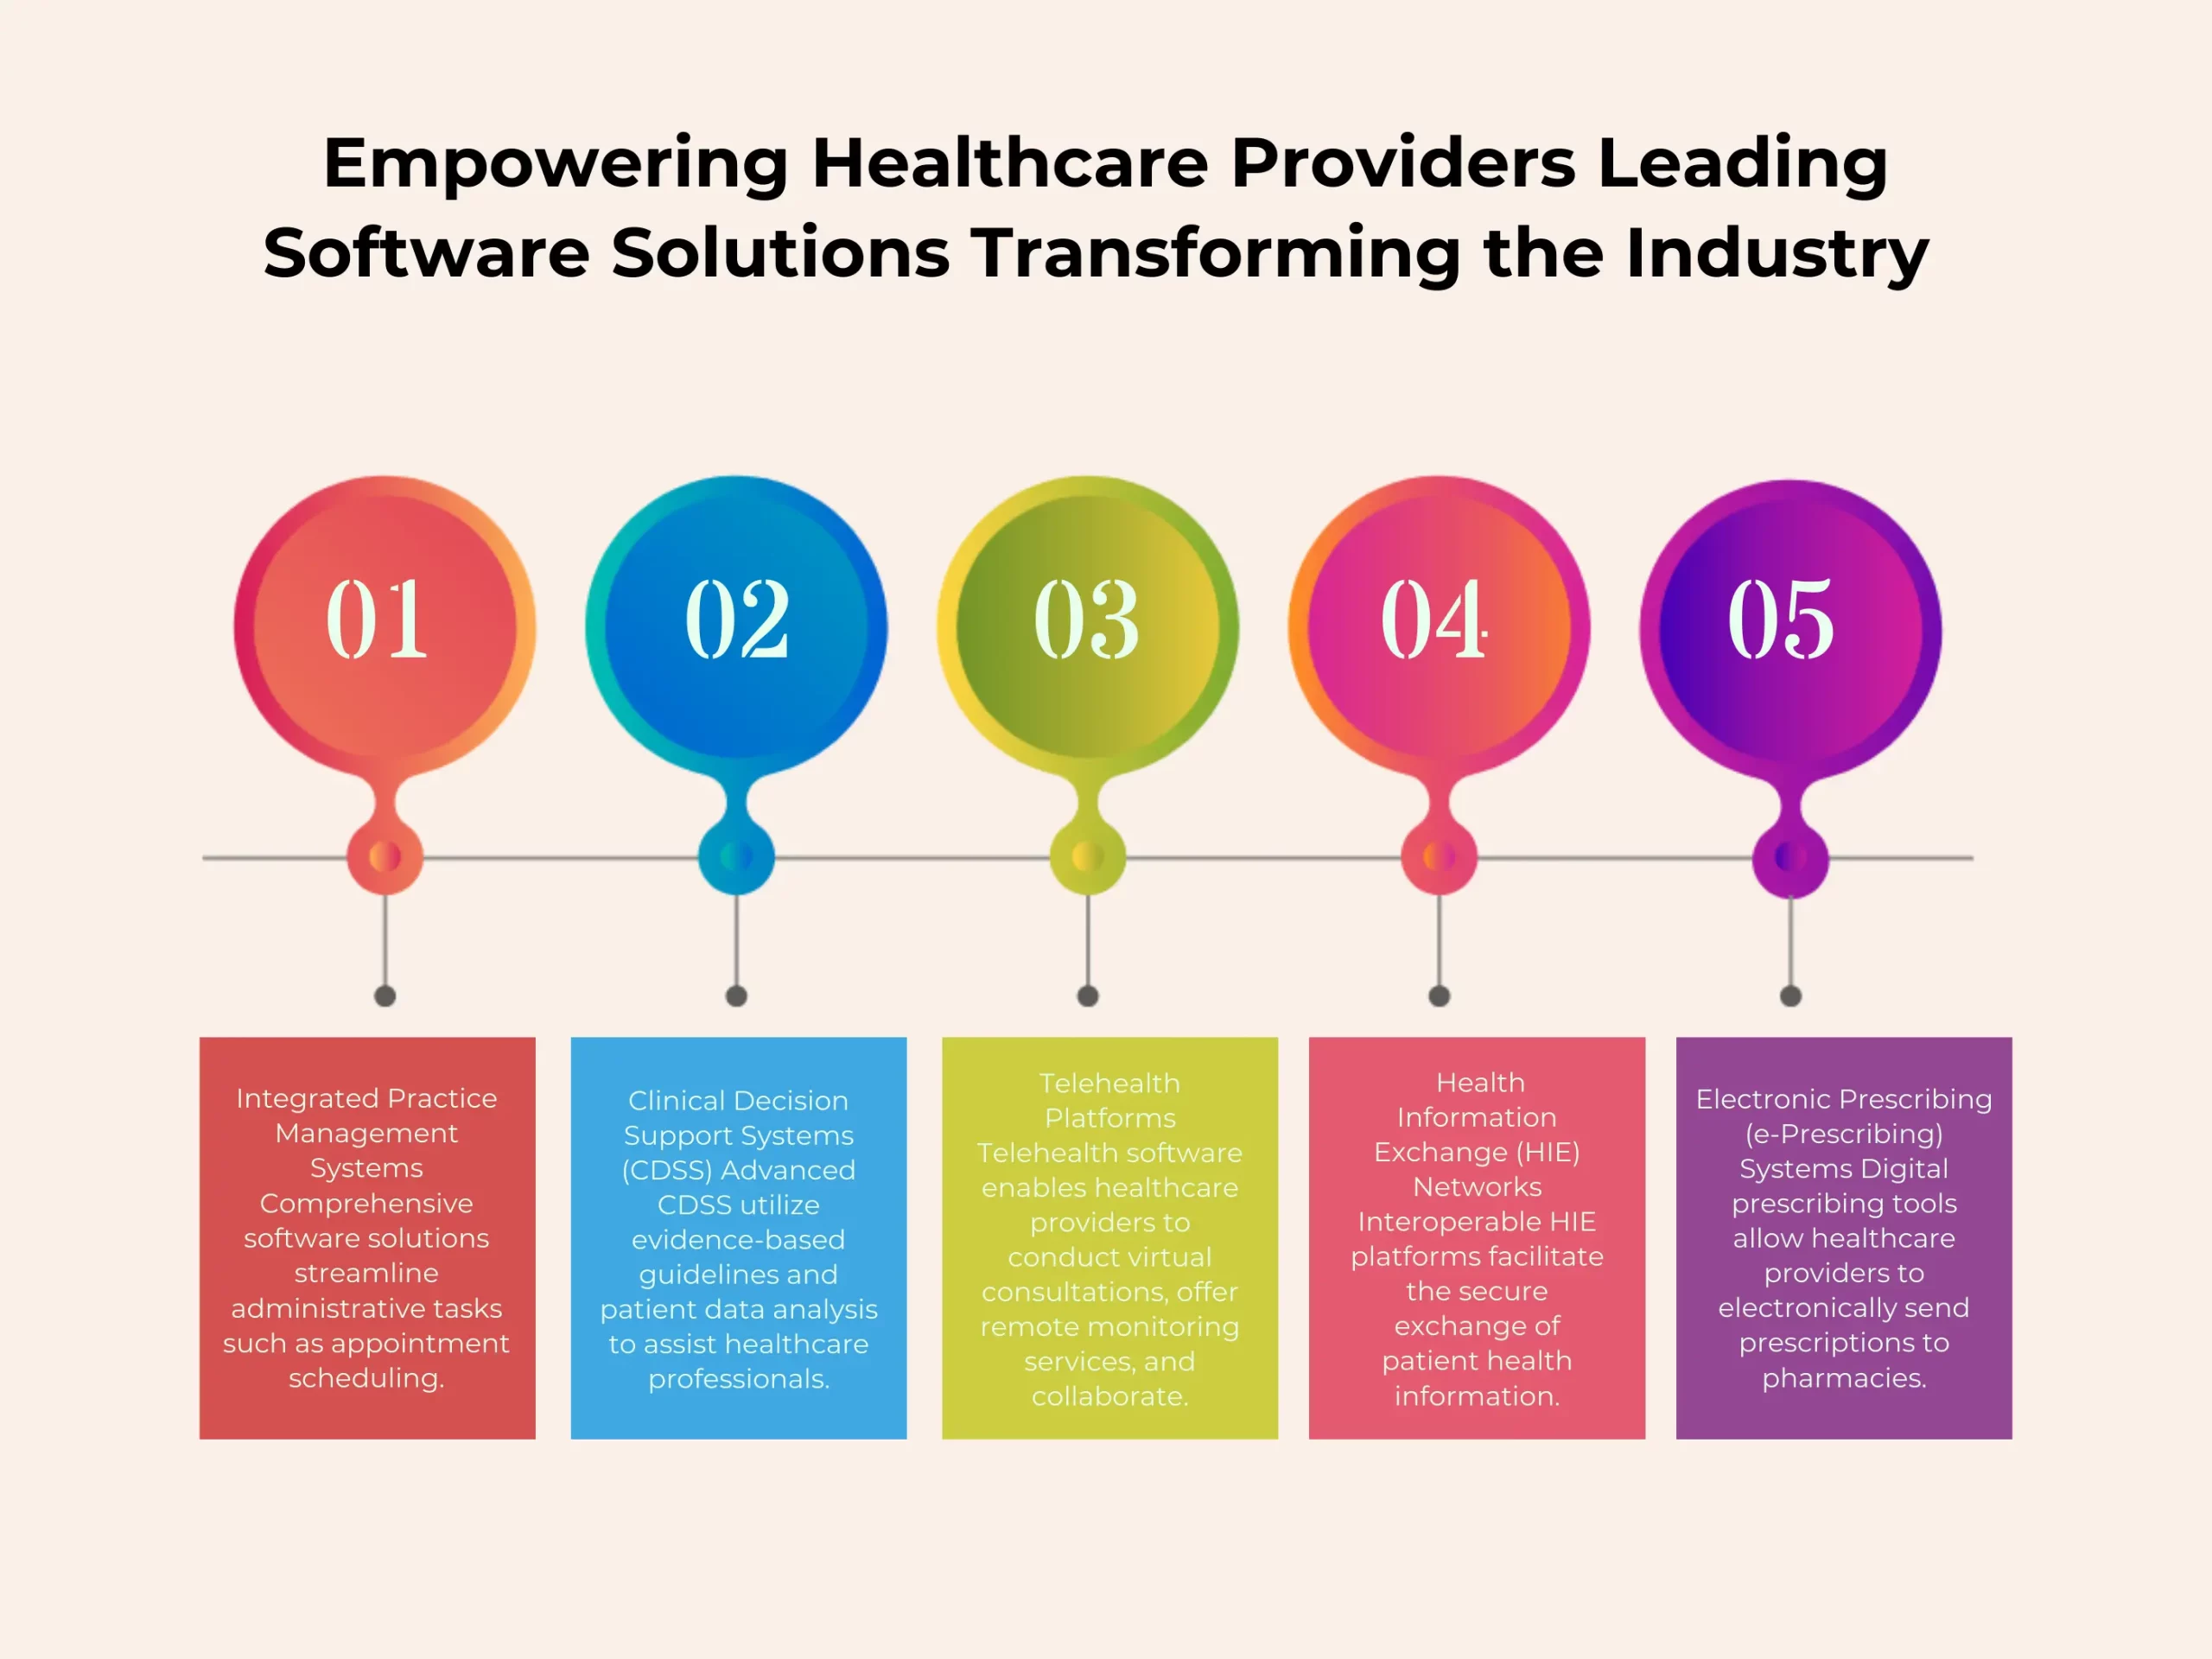 Empowering Healthcare Providers Leading Software Solutions Transforming the Industry